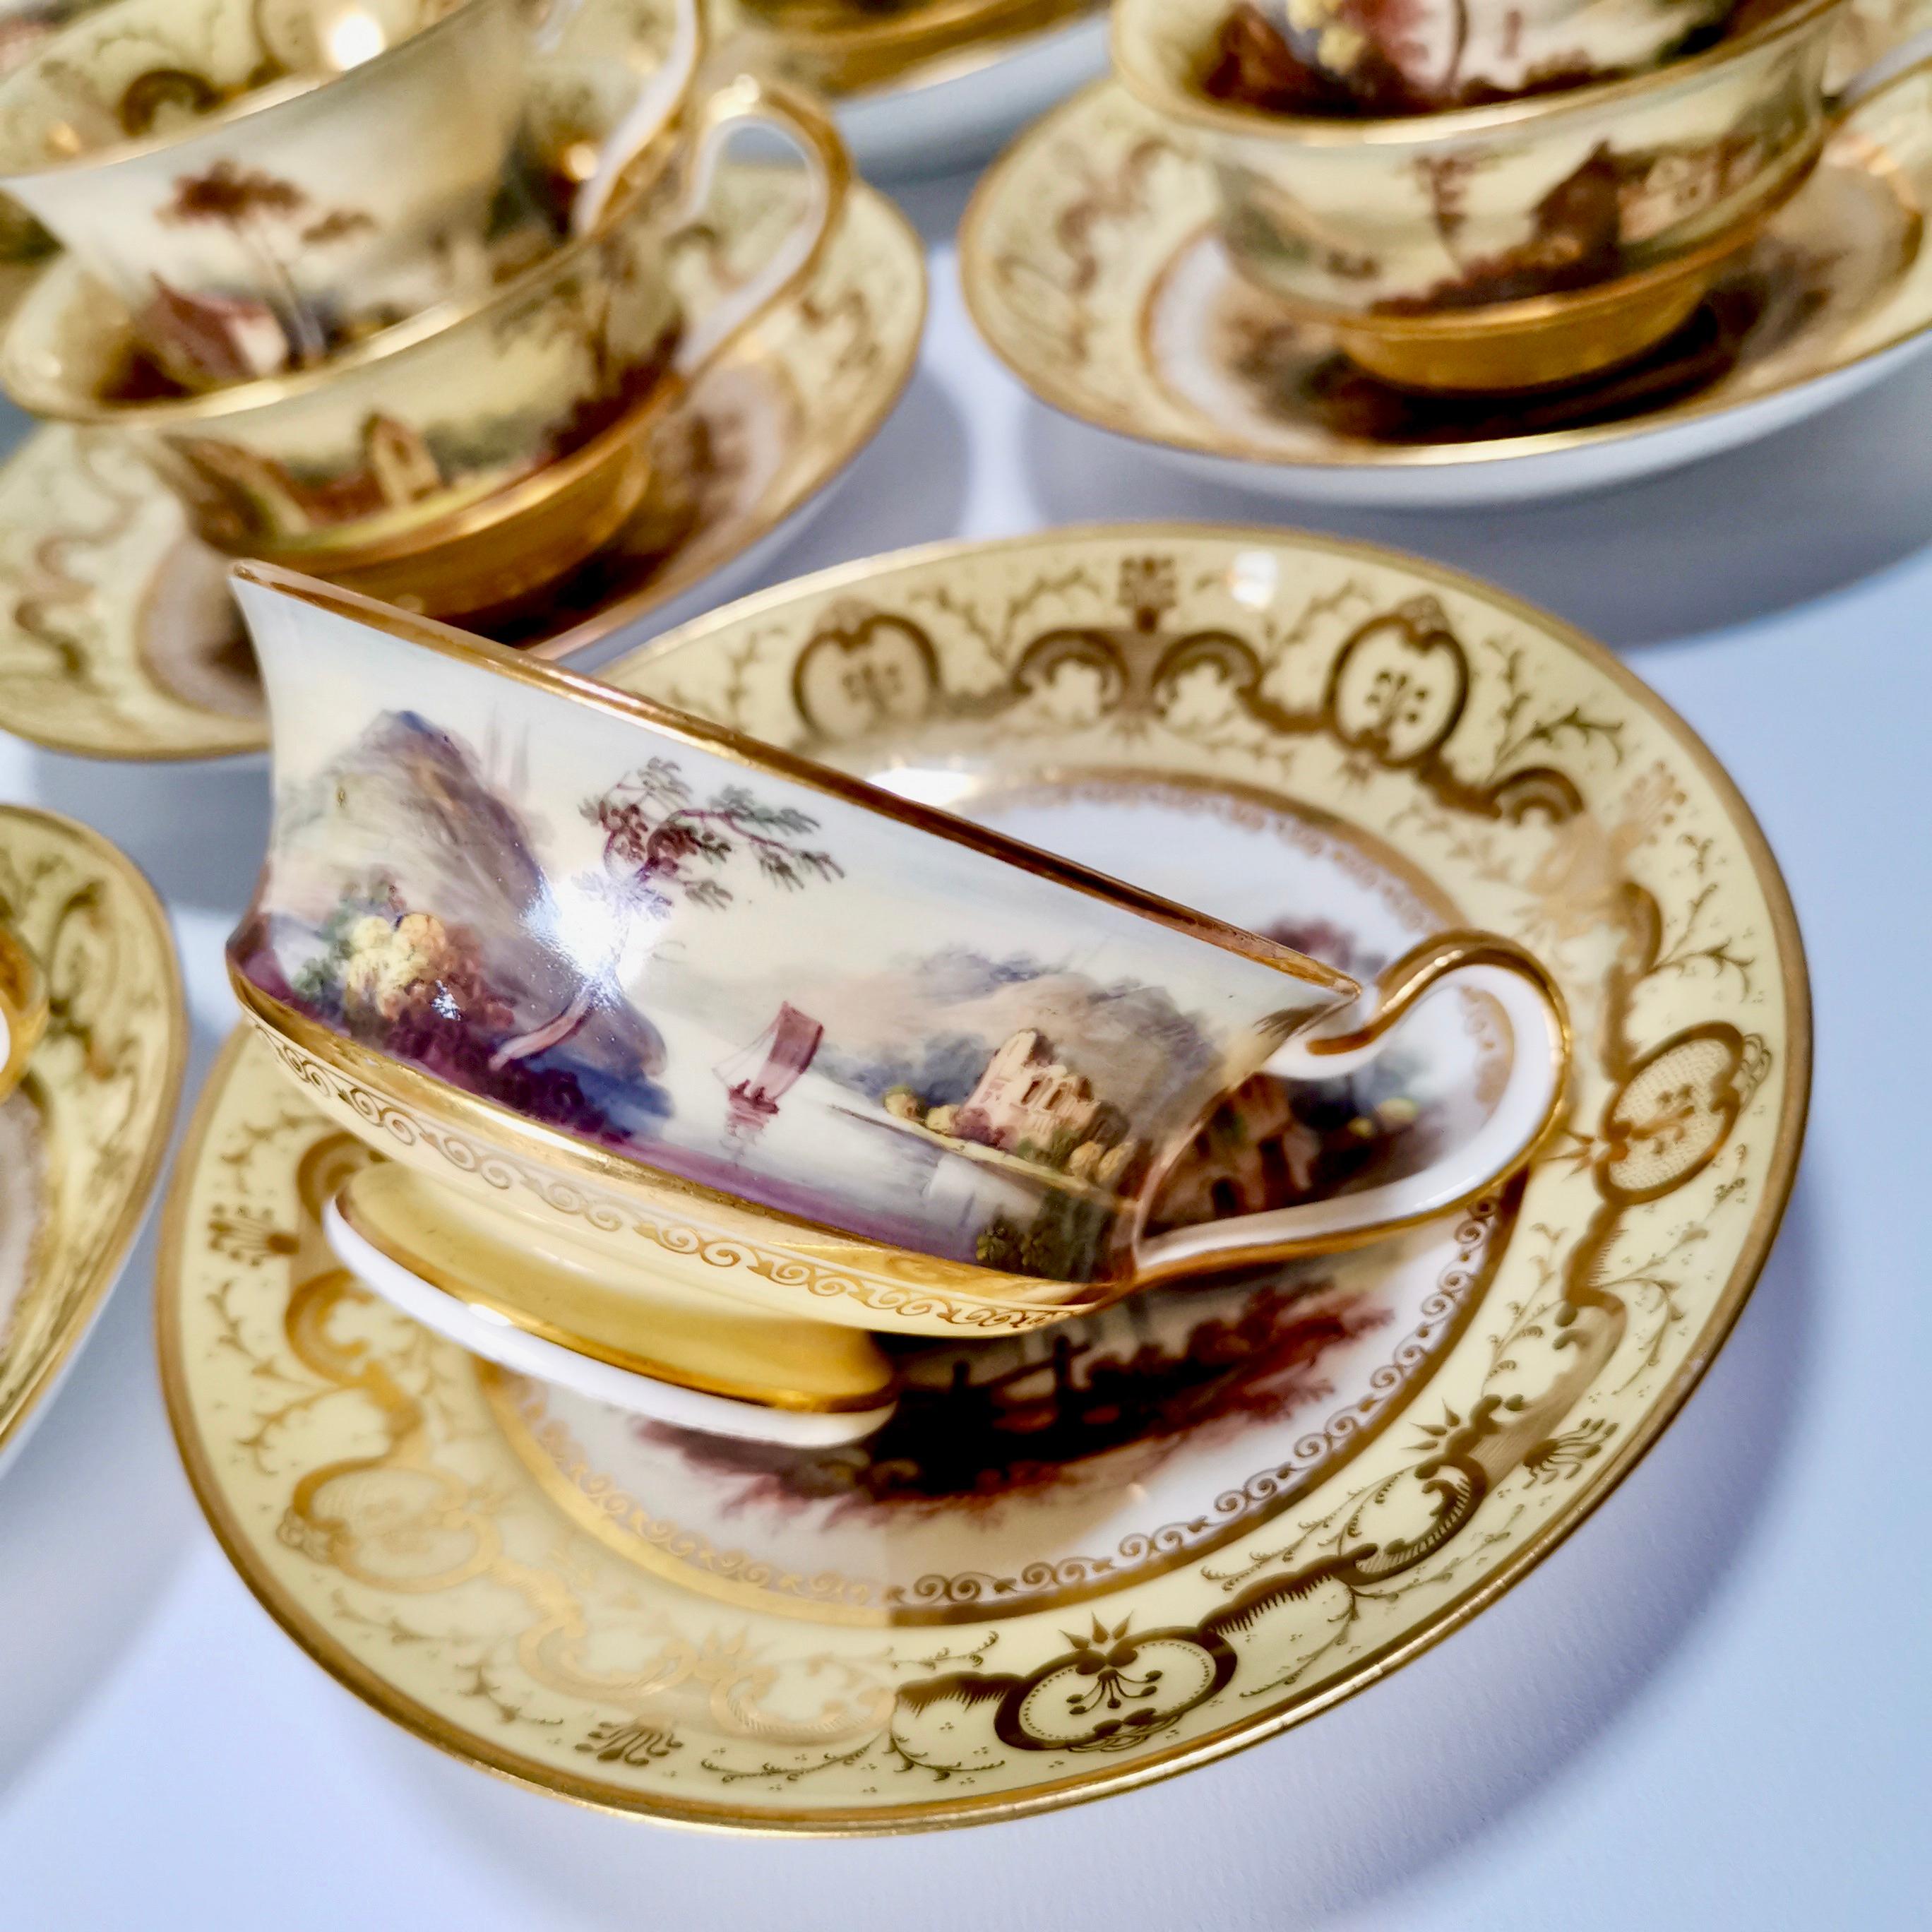 Early 19th Century Minton Porcelain Tea Service, Yellow with Landscapes, Provenance Regency